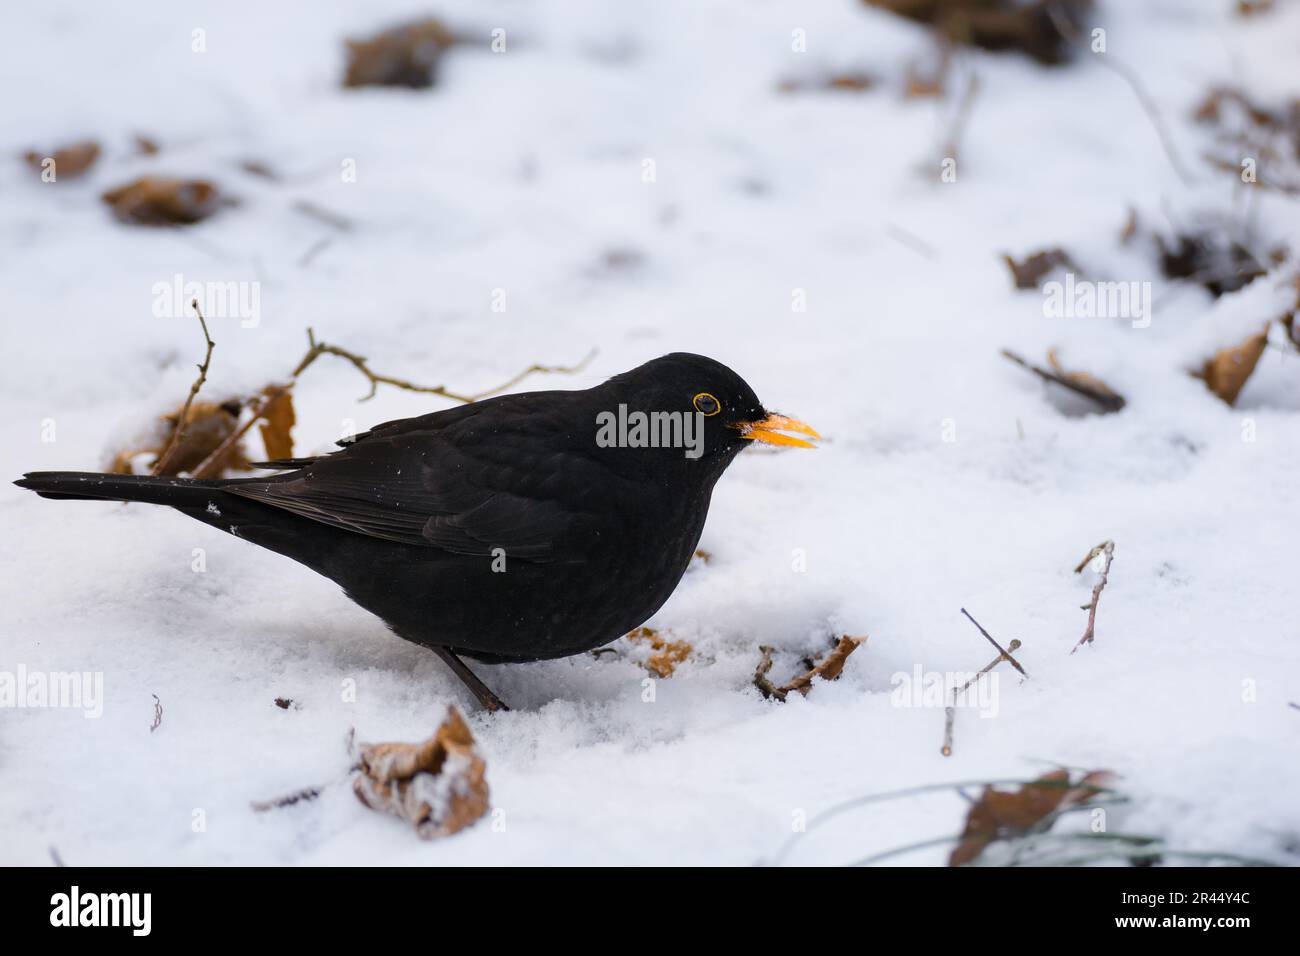 A close up wildlife photograph of an Adult male Eurasian Blackbird on the snowy winter forest floor, taken in Hagaparken Stockholm Sweden in December Stock Photo